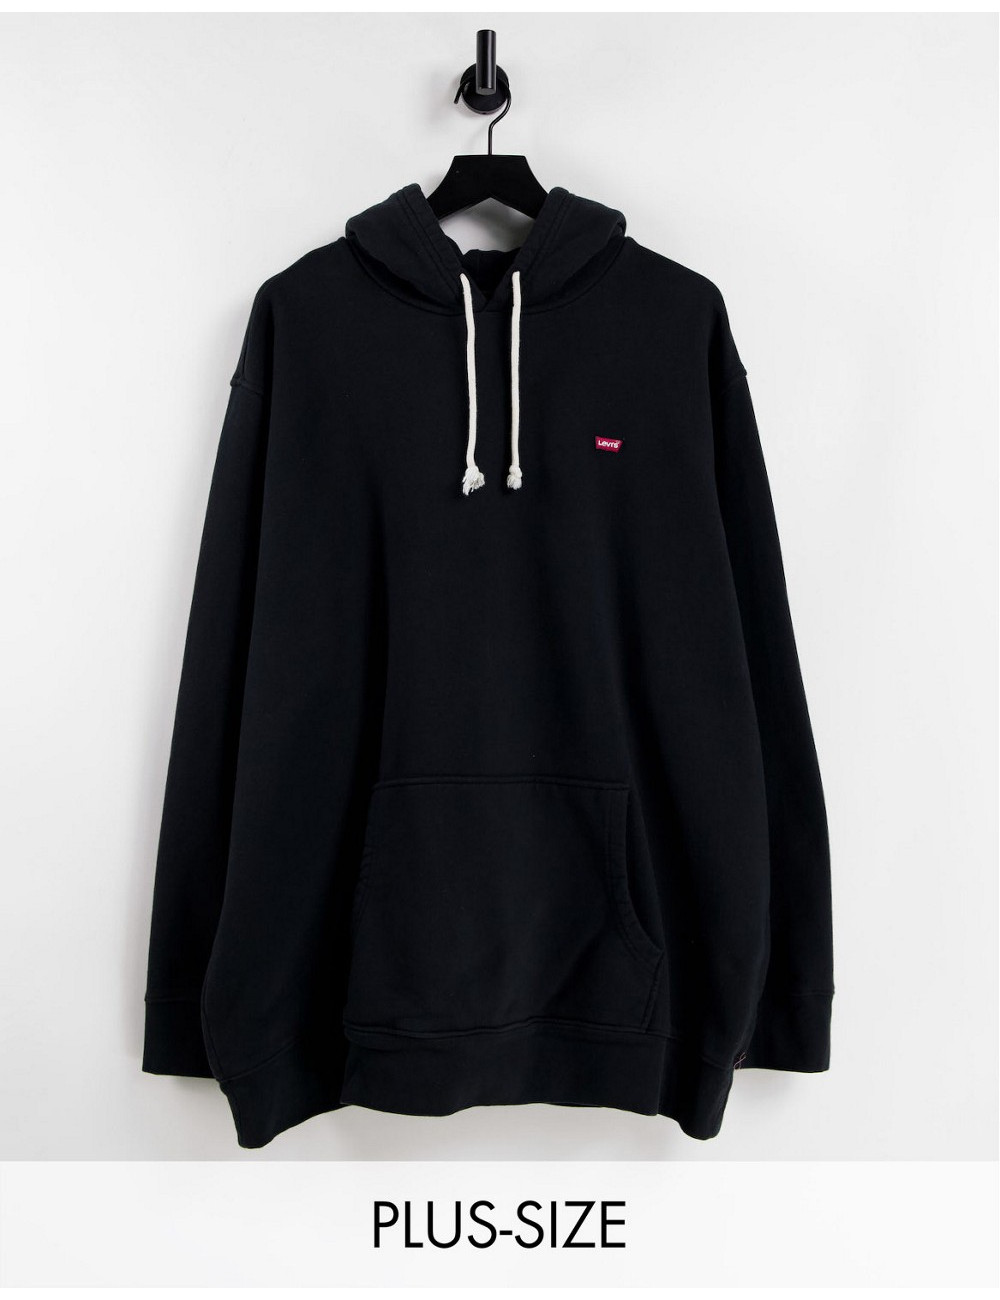 Levi's Big & Tall hoodie in...